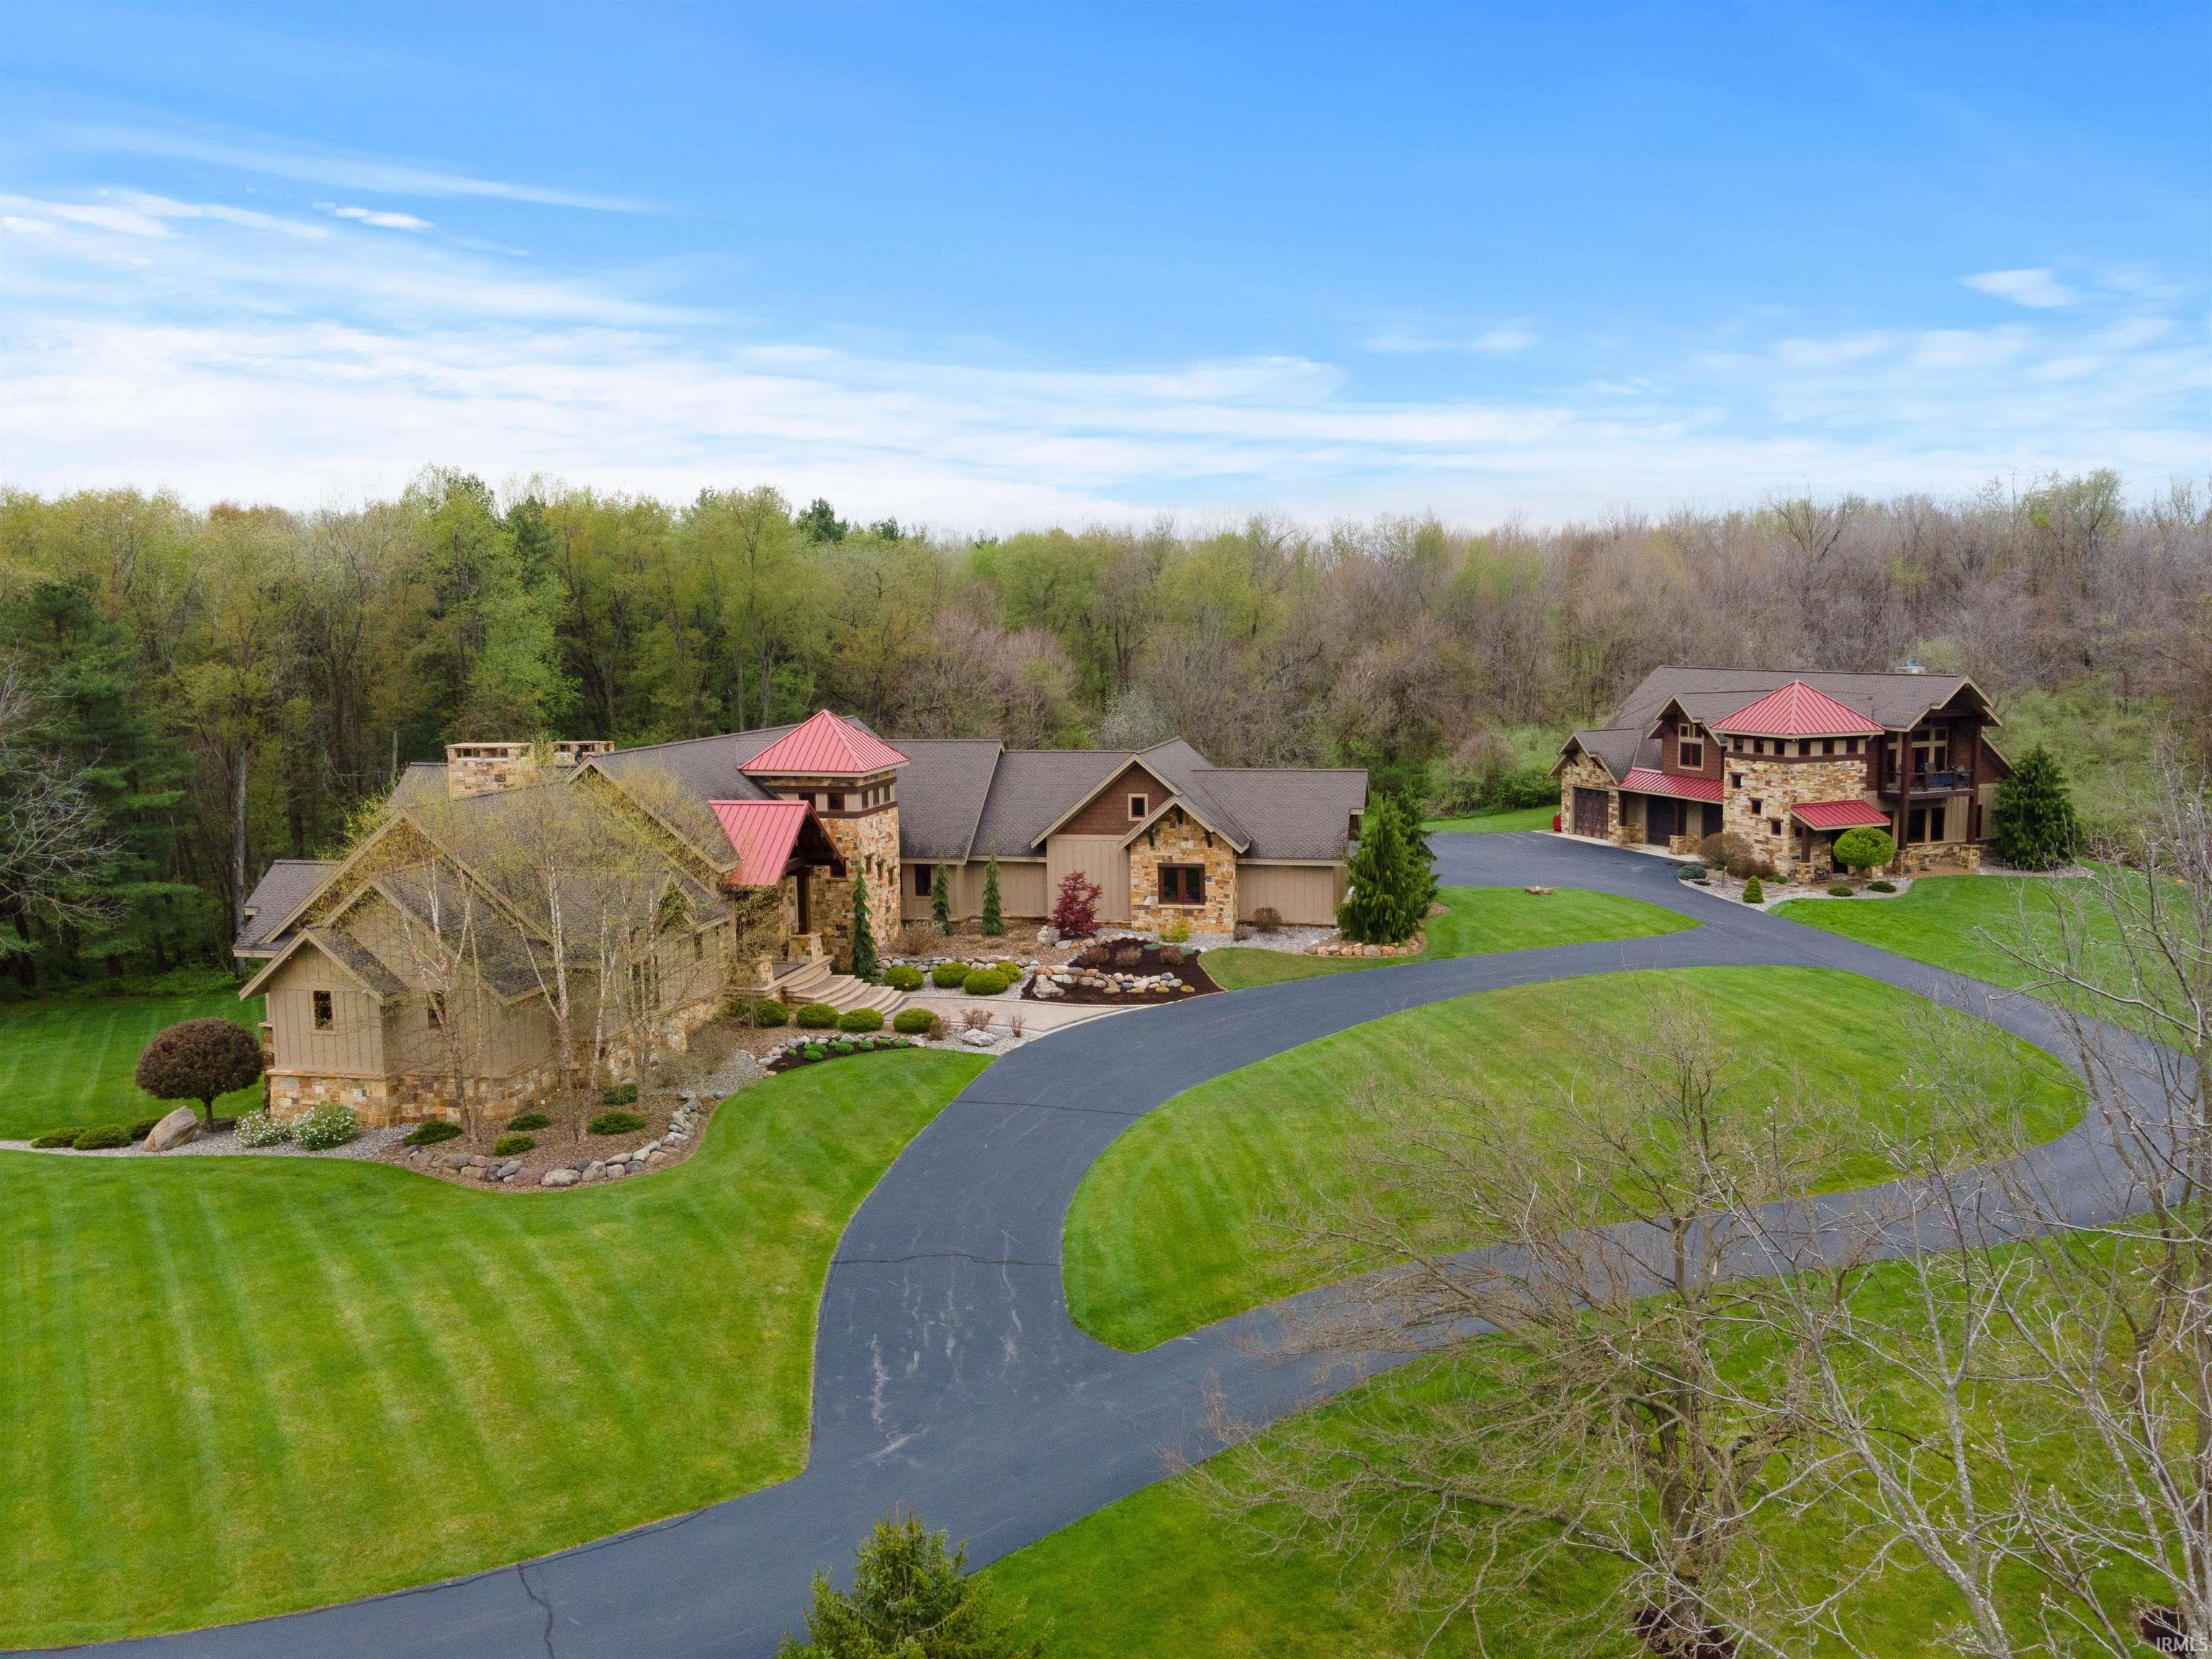 Live your best life in this private, one-of-a-kind country oasis w/12,000+ sq./ft. (2010) custom home and 3,000+ sq/foot Barn-dominium on 59+ partially wooded acres w/1/4-mile paved driveway and 1.3-acre stocked pond. Masterfully designed and crafted, the properties feature natural stone, Indiana-sourced wood for beams, stunning hardwoods, wood ceilings, slate tile, sweeping views, luxury finishes at every turn, pro landscape/hardscape (irrigated w/LED lighting), and state-of-the-art technology. The main home features open concept living w/2-story beamed timber-frame ceilings and floor-to-ceiling windows, 2-story stone fireplace + large dining area. The chef's kitchen boasts double granite islands, instant hot water, 6- burner/griddle Wolf cooktop + double Wolf wall ovens, Subzero oversized side-by-side, gracious walk-in pantry, 2 Asko dishwashers, & stunning custom built-ins. French doors lead to the timber-frame screened porch w/slate floors, 2-story stone fireplace, built-in stone grill, stunning views. The primary en-suite boasts a private balcony, oversized walk-in stone shower + copper accents, double vanity w/granite/stone, enormous walk-in closets & is cleverly connected to laundry room & mud-rooms. Off the foyer, a stone accented hallway leads to BRs 2 & 3, both large w/ stone/tile ensuites, walk-in closets and 12' ceilings, and the library (4th BR) w/private balcony, en-suite, and fabulous built-in shelves + desk. Don’t miss the 2nd story loft overlooking foyer and great rooms (more views!) w/ game/lounge area in the middle and doors on either end to walk-in floored attic (*future bedrooms). The finished walk-out lower level is an entertainers' paradise - 12-ft. ceilings, chef’s kitchen w/granite bar (seating for 6), open to living/game room w/stone fireplace. Sliders lead to fabulous covered outdoor space w/hot tub, 2-way stone fireplace, outdoor TV (*future pool). A large guest suite, tricked-out theatre room, fitness room, safe room (“Fort Knox”), and half bath complete the lower level. The detached Barn-dominium boasts 4 extra-long tandem bays (8+ car temperature-controlled), dog run, heated workshop (built-ins + epoxy floor), half bath, laundry room & mud room on the main level. Upstairs, 1700+ sq. ft., 2 BR/1 BA (dual shower + double vanity), luxury living area (slate, hardwoods, stone, granite) w/open concept, stone fireplace, and vaulted wood ceiling w/reclaimed wood beams. Security tied to main house + wired for sound.